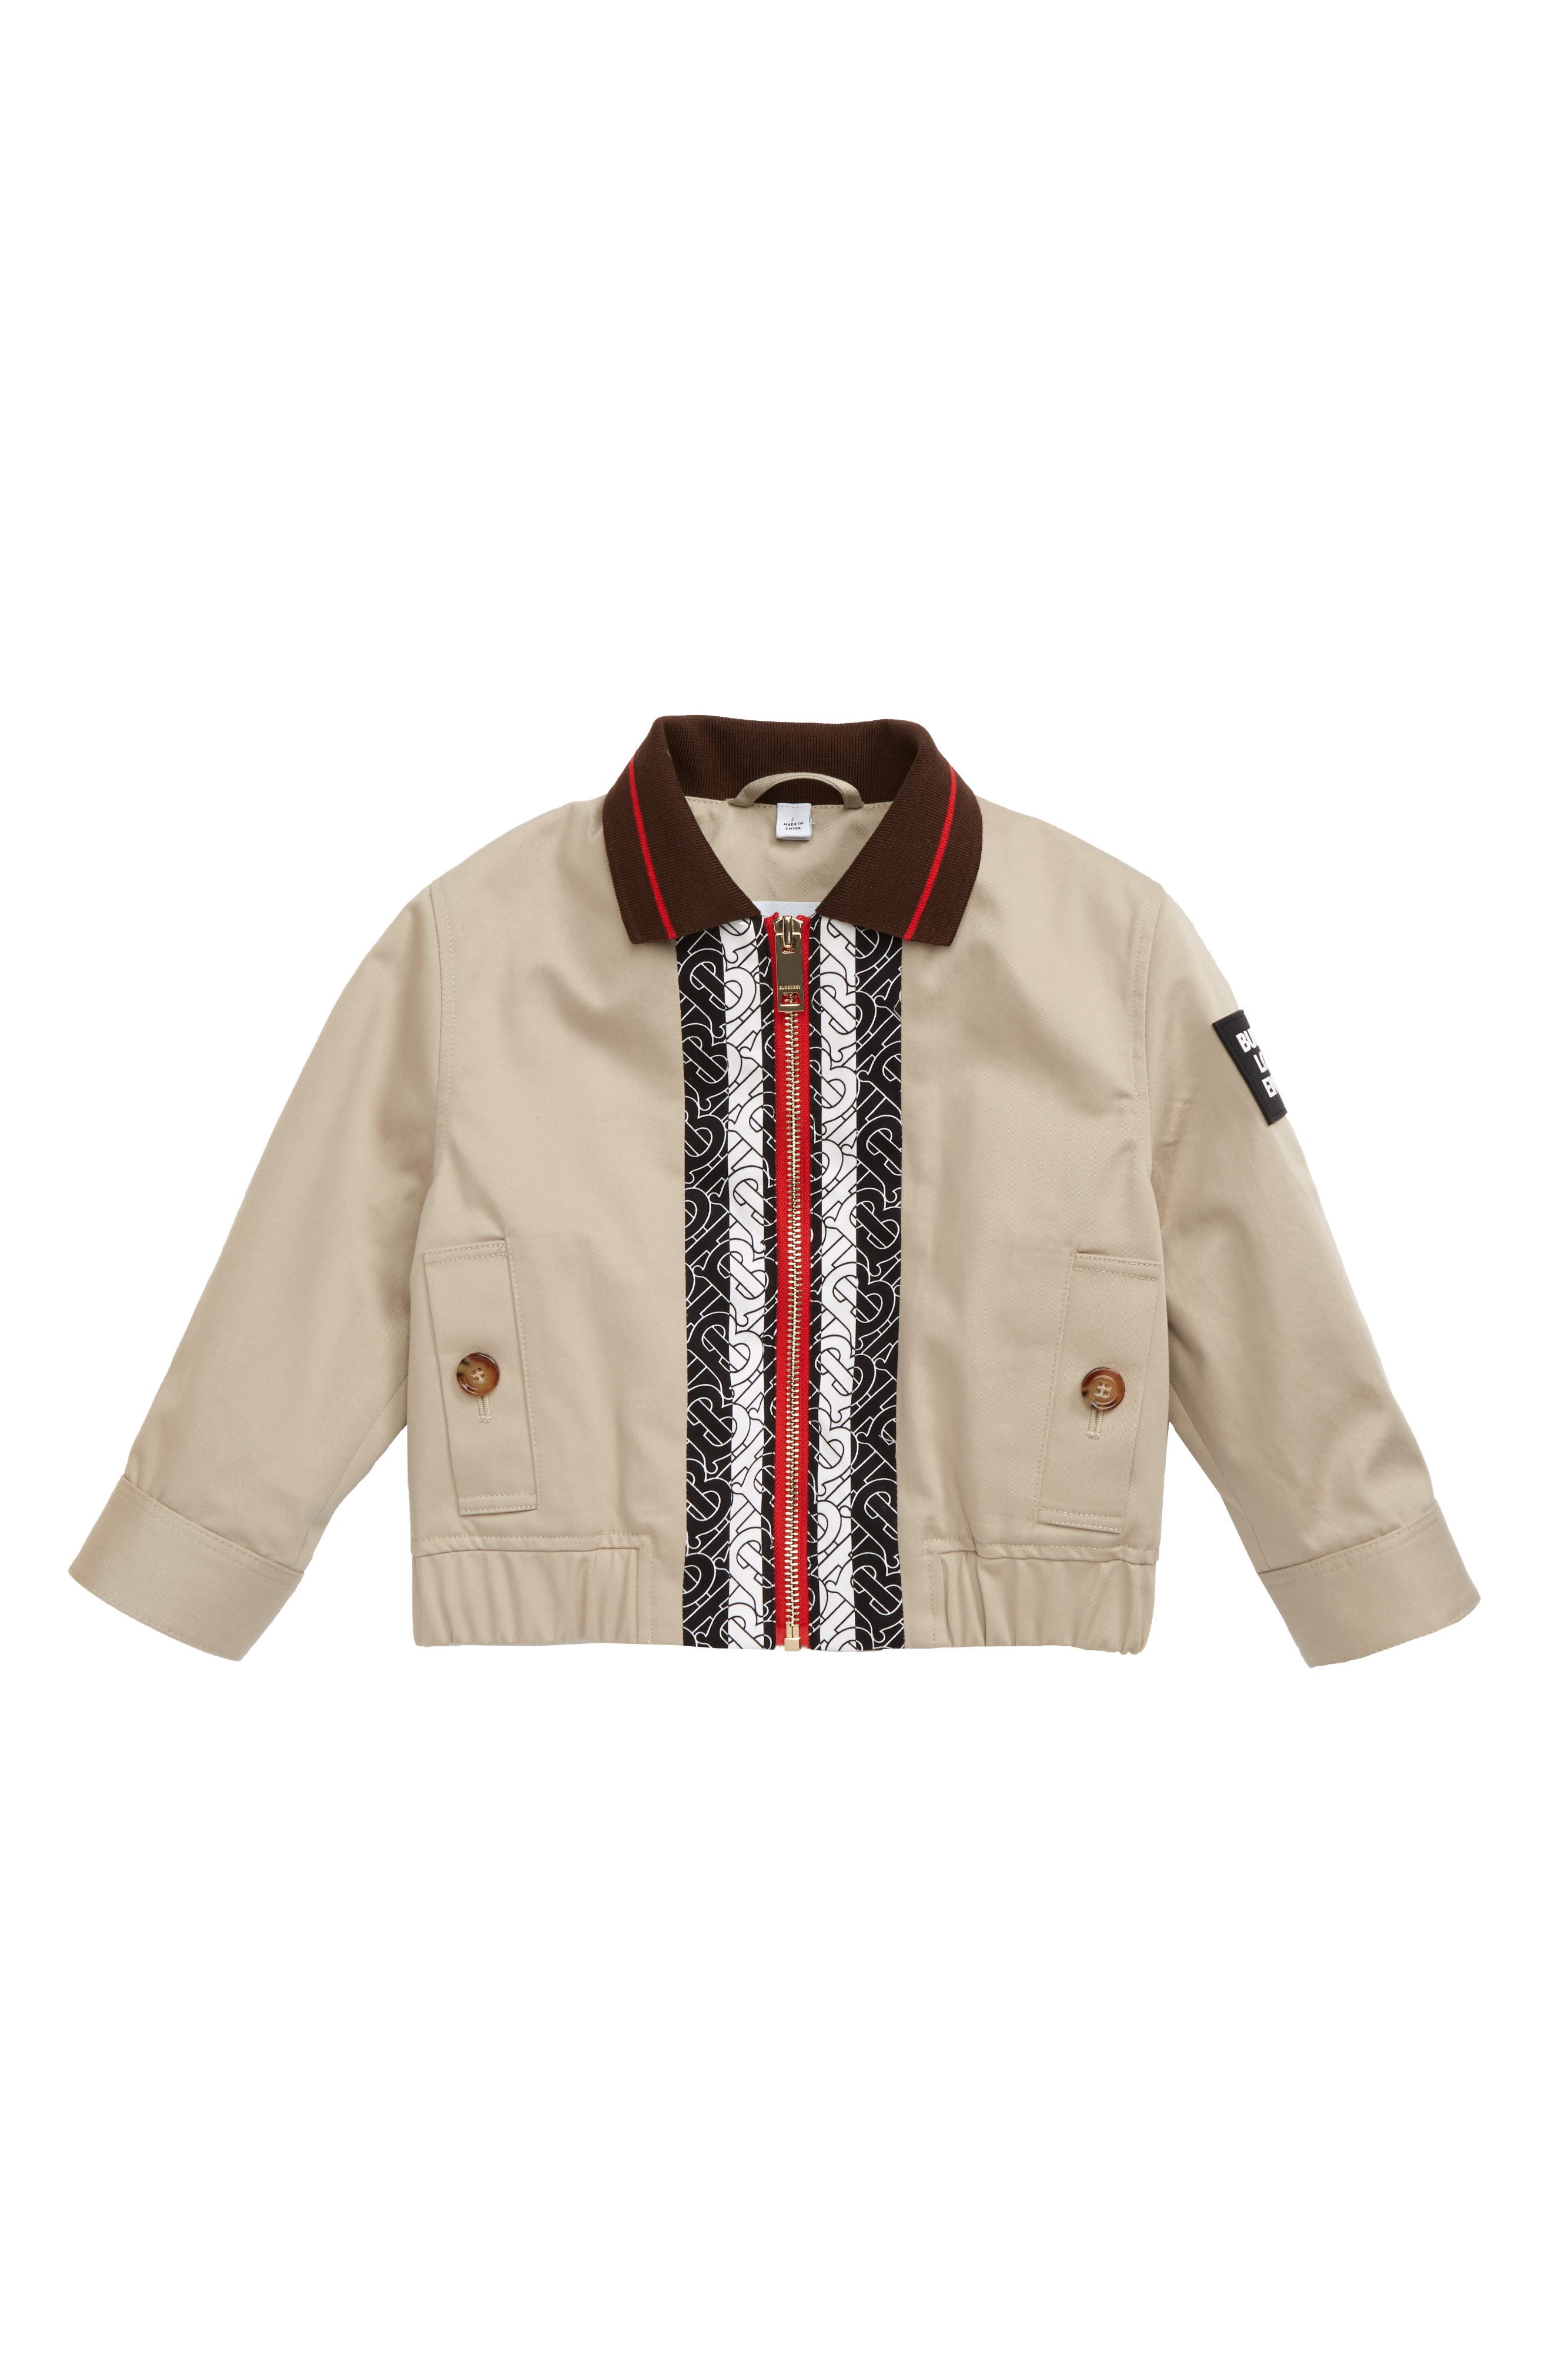 burberry jackets for toddlers